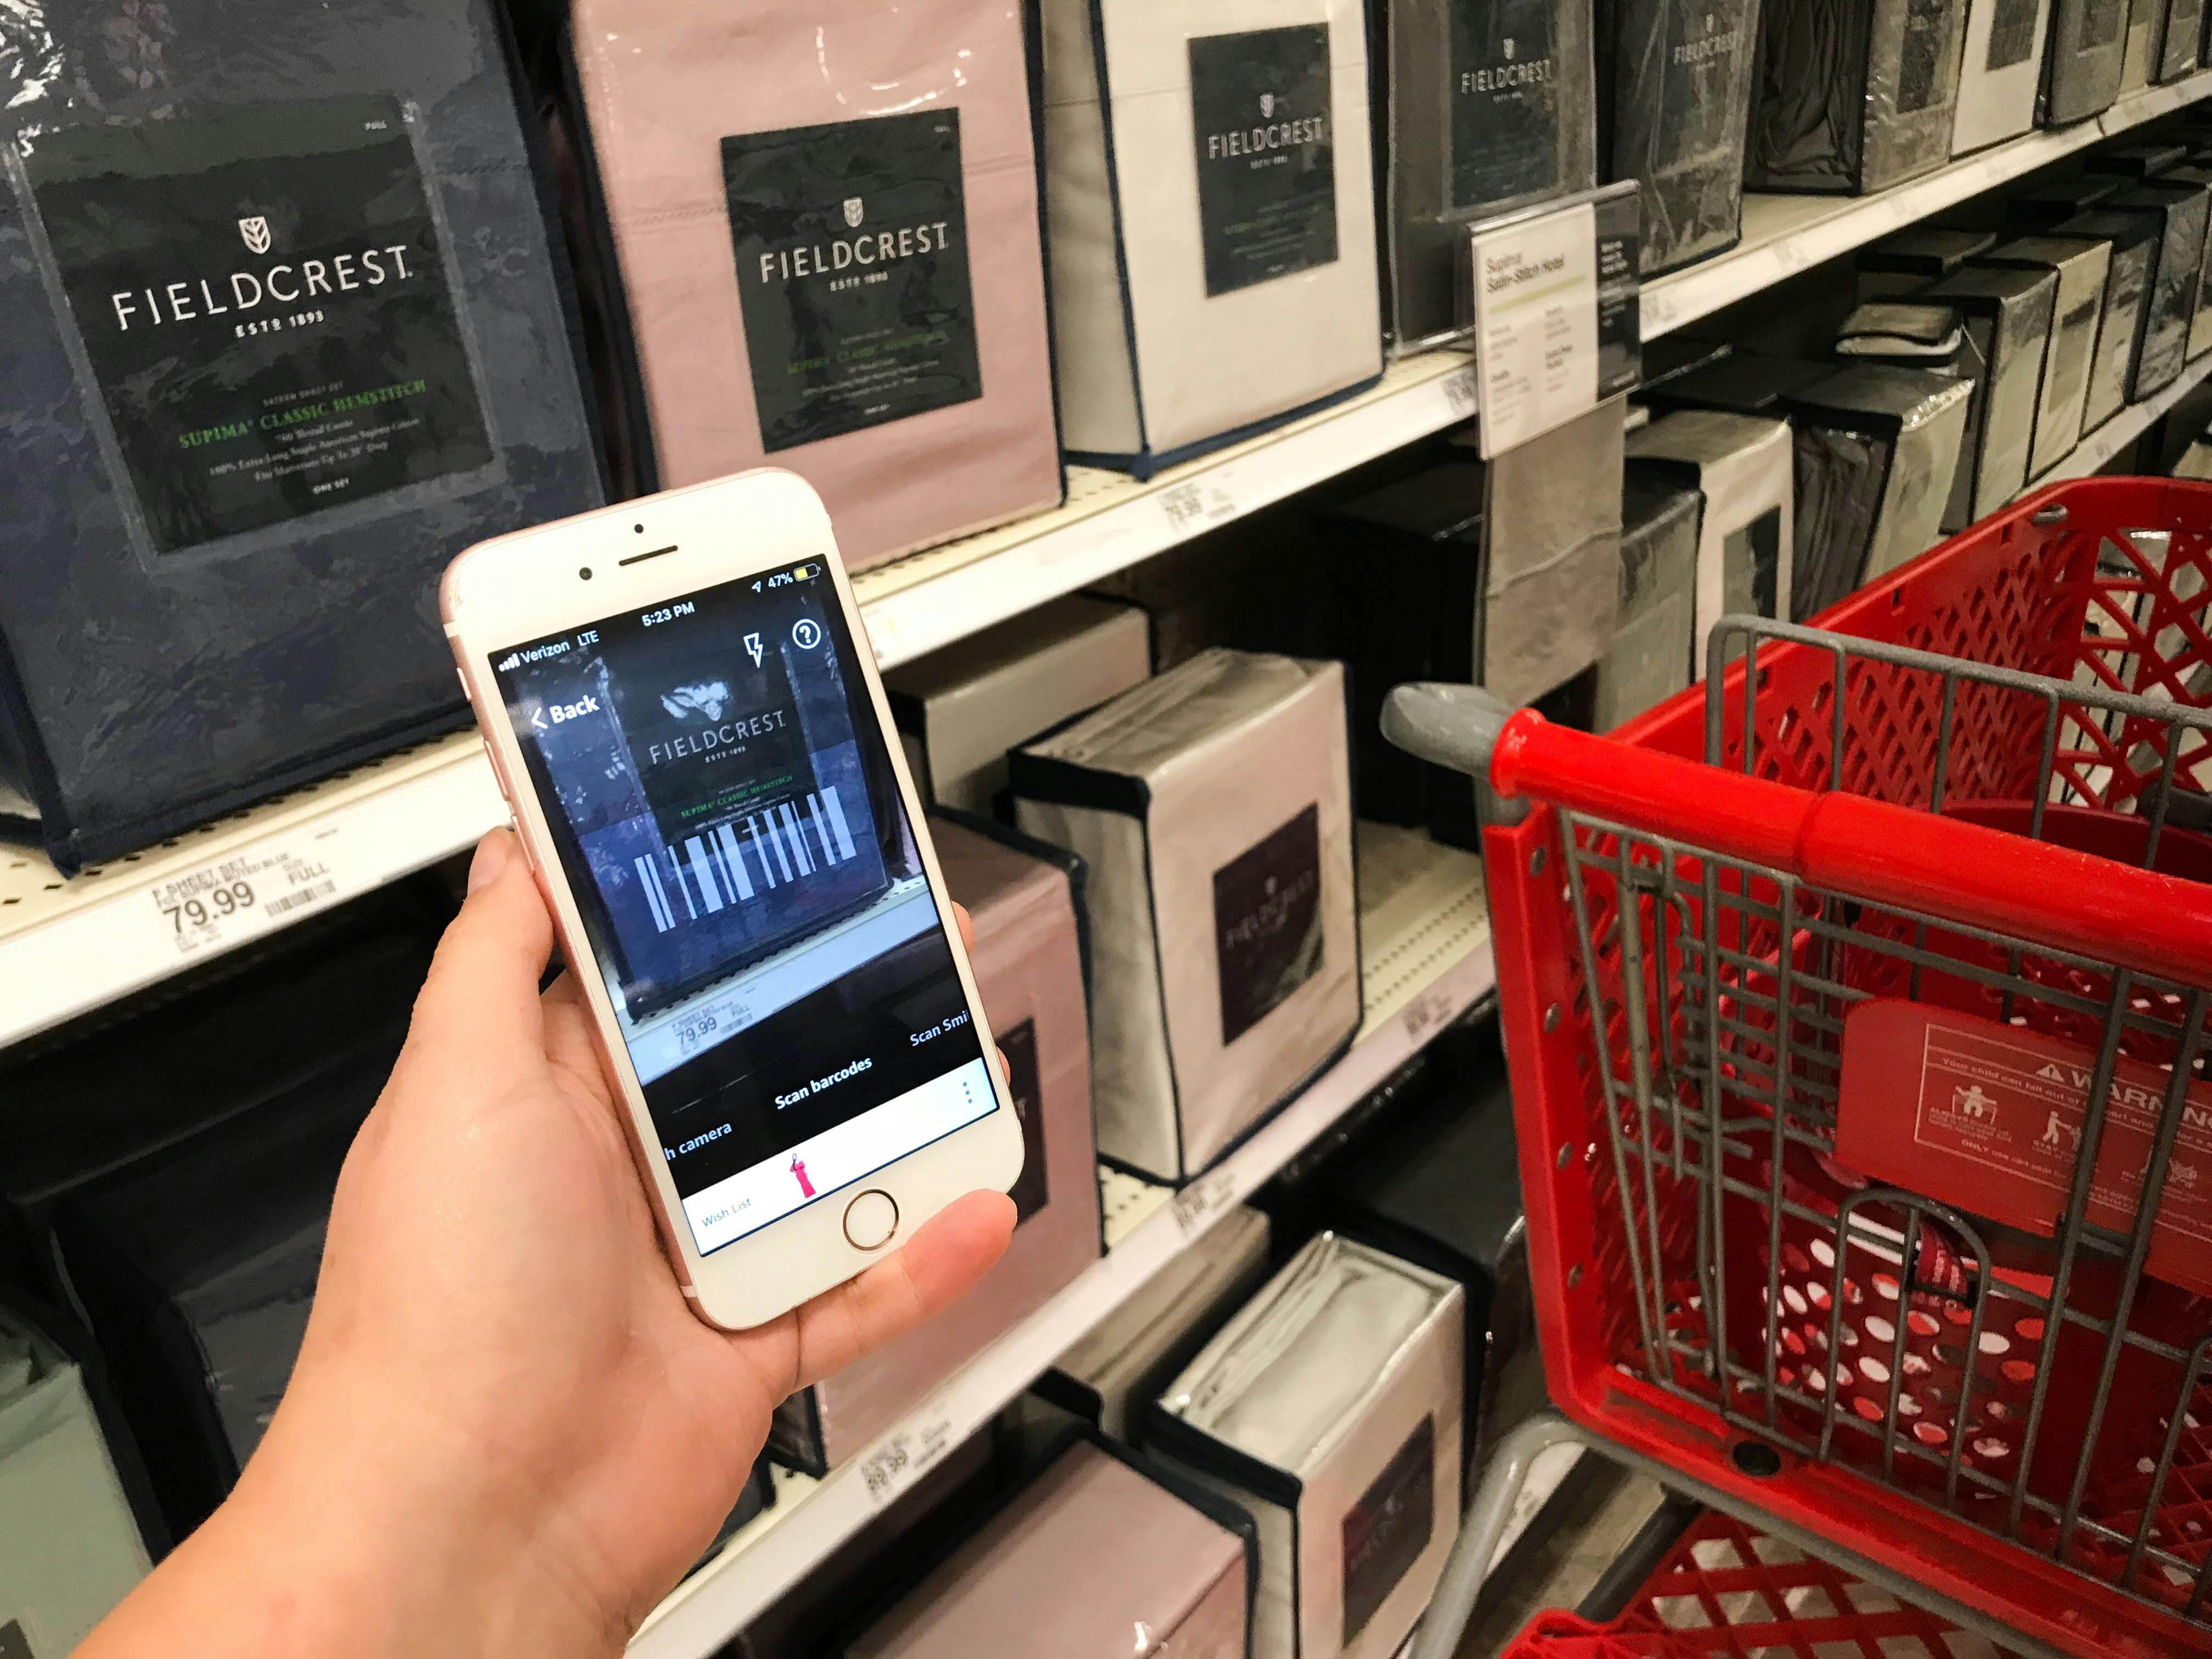 Someone holding a phone in the bedding aisle at Target